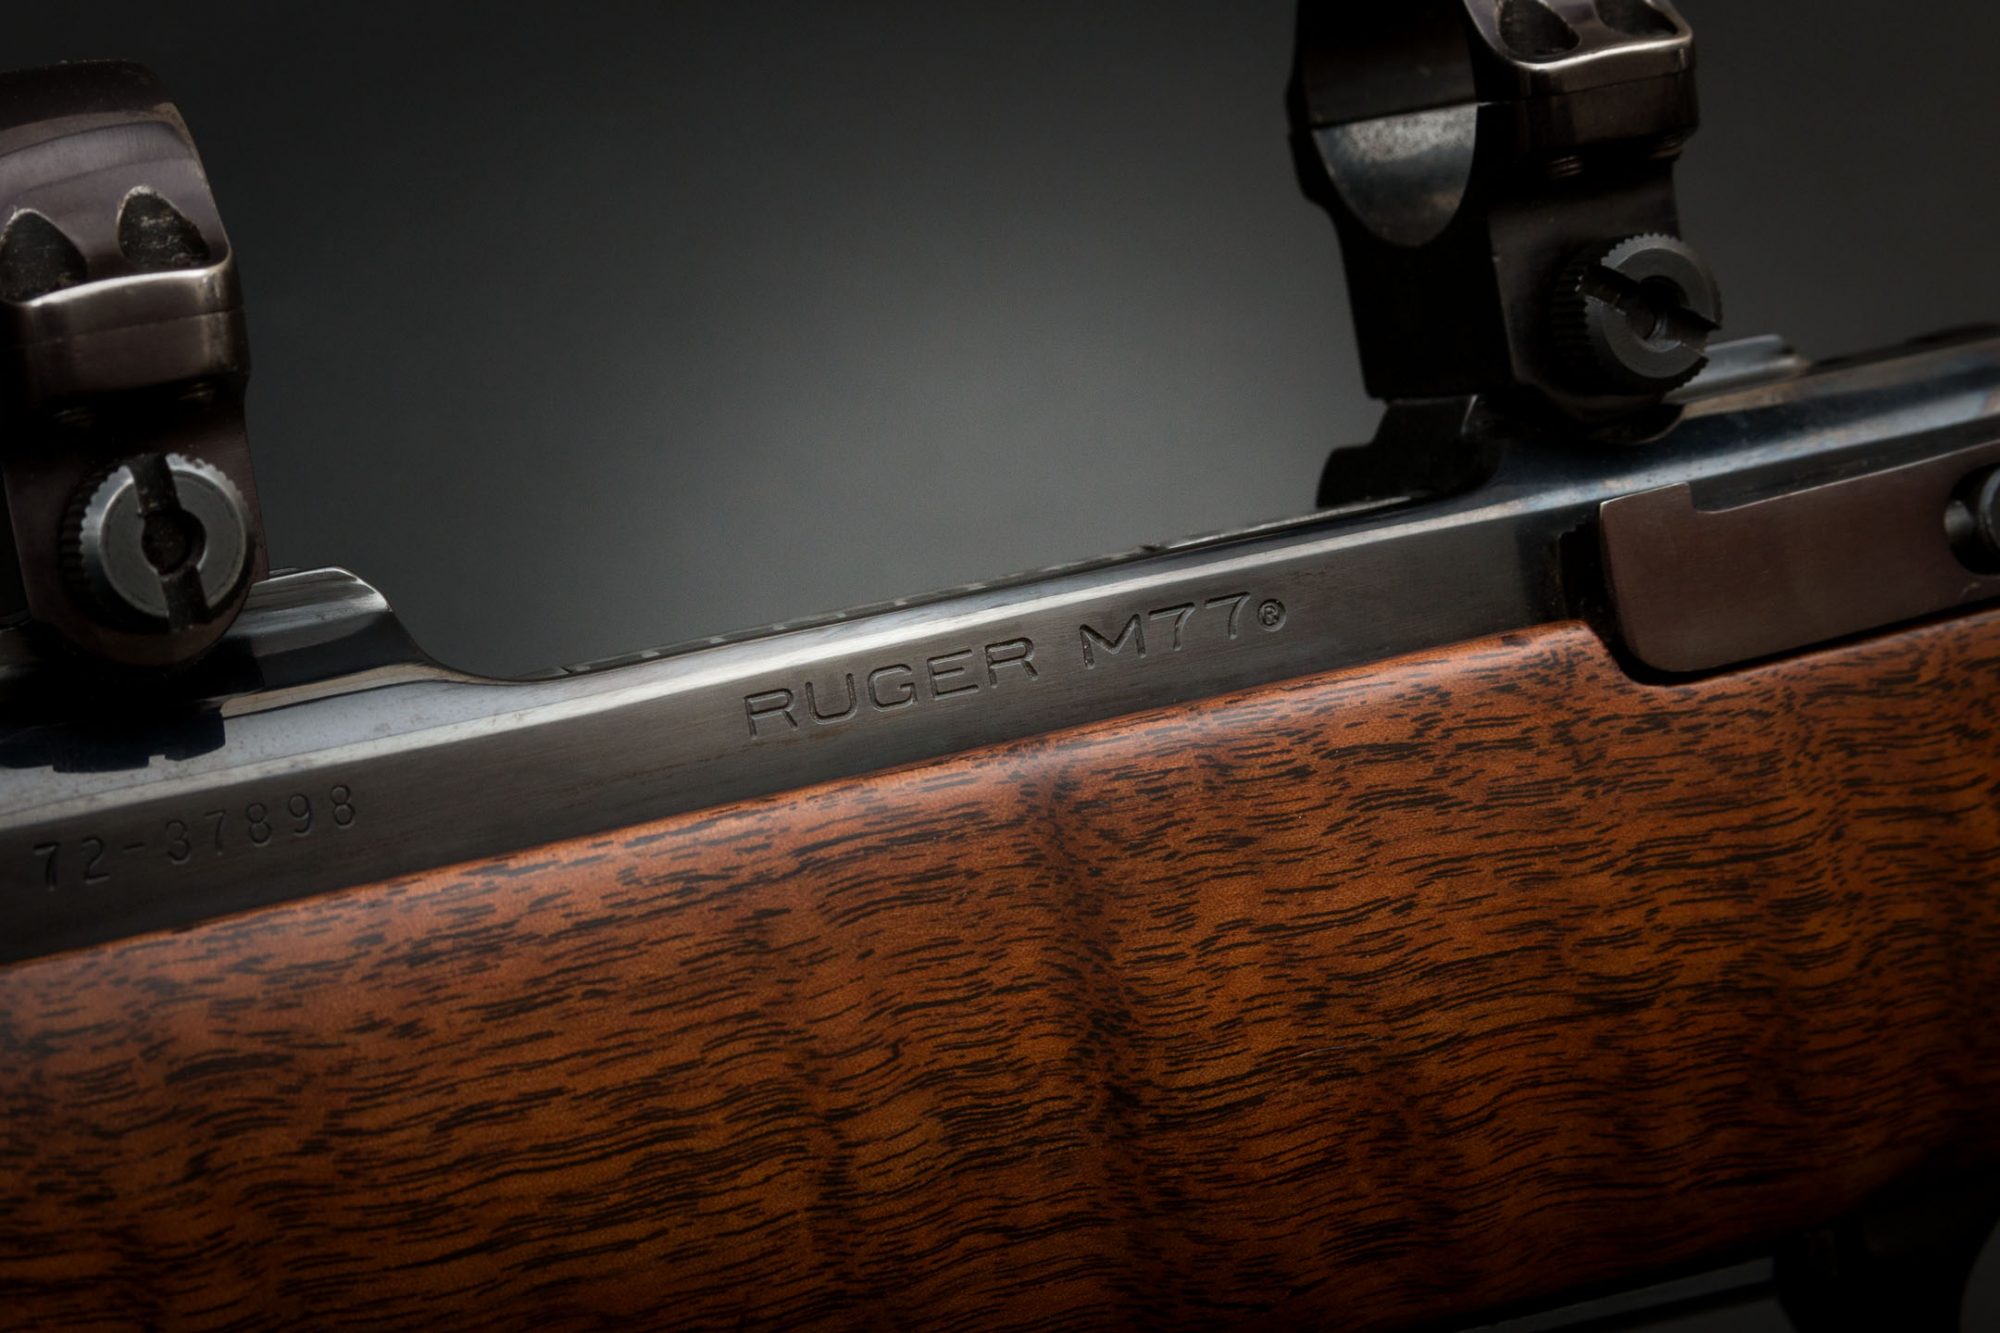 Ruger M77 bolt-action rifle chambered in 7x57mm, for sale by Turnbull Restoration of Bloomfield, NY